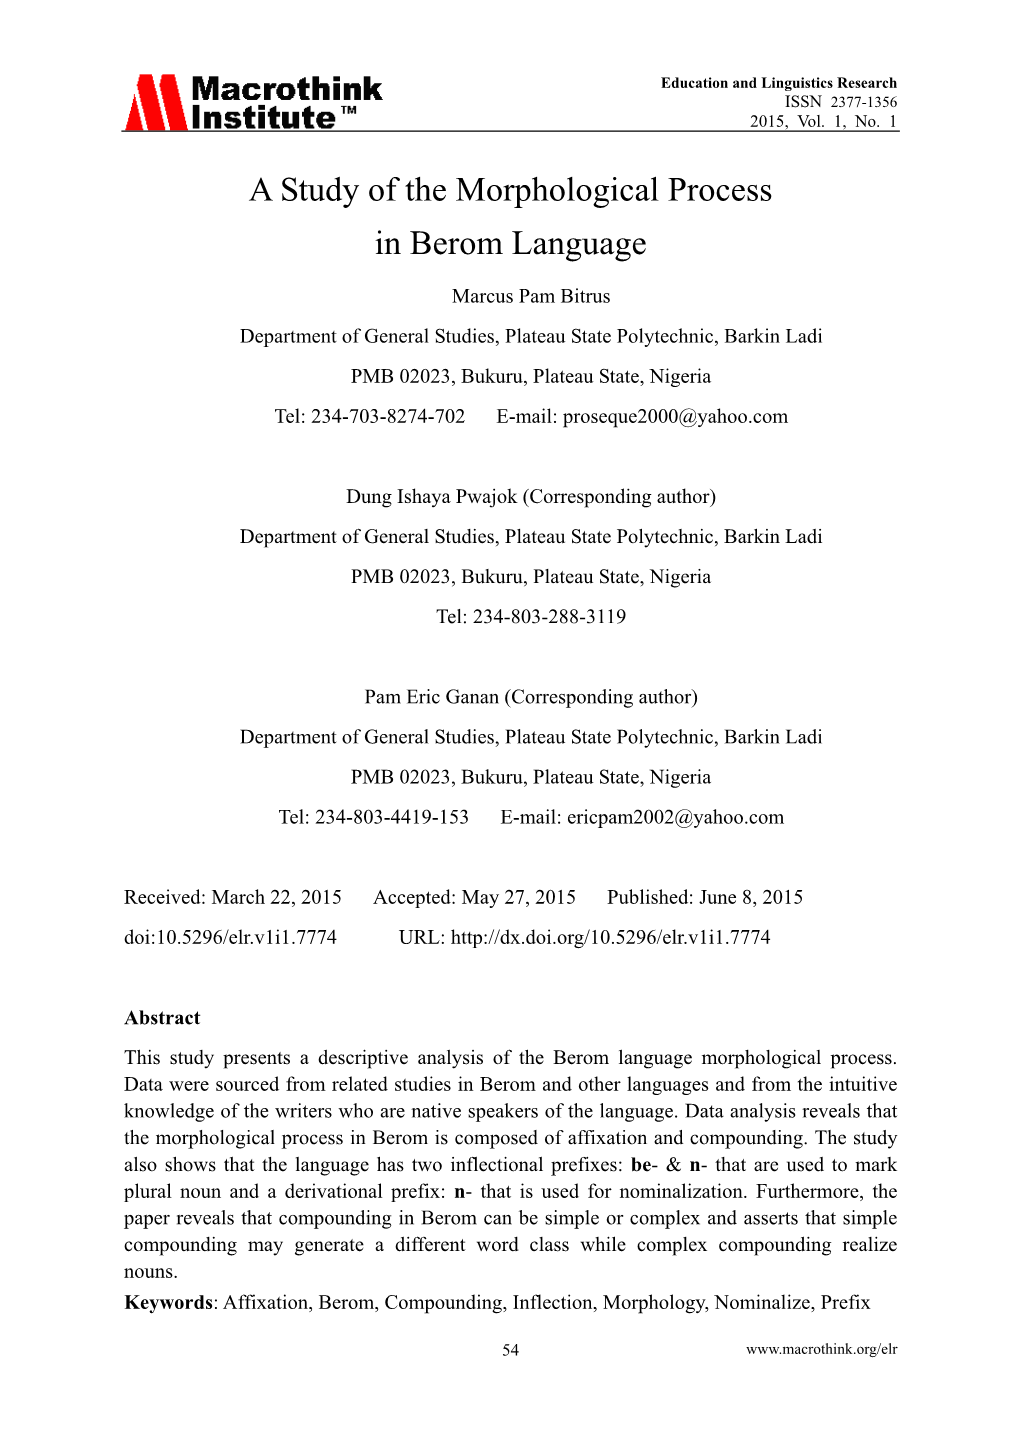 A Study of the Morphological Process in Berom Language